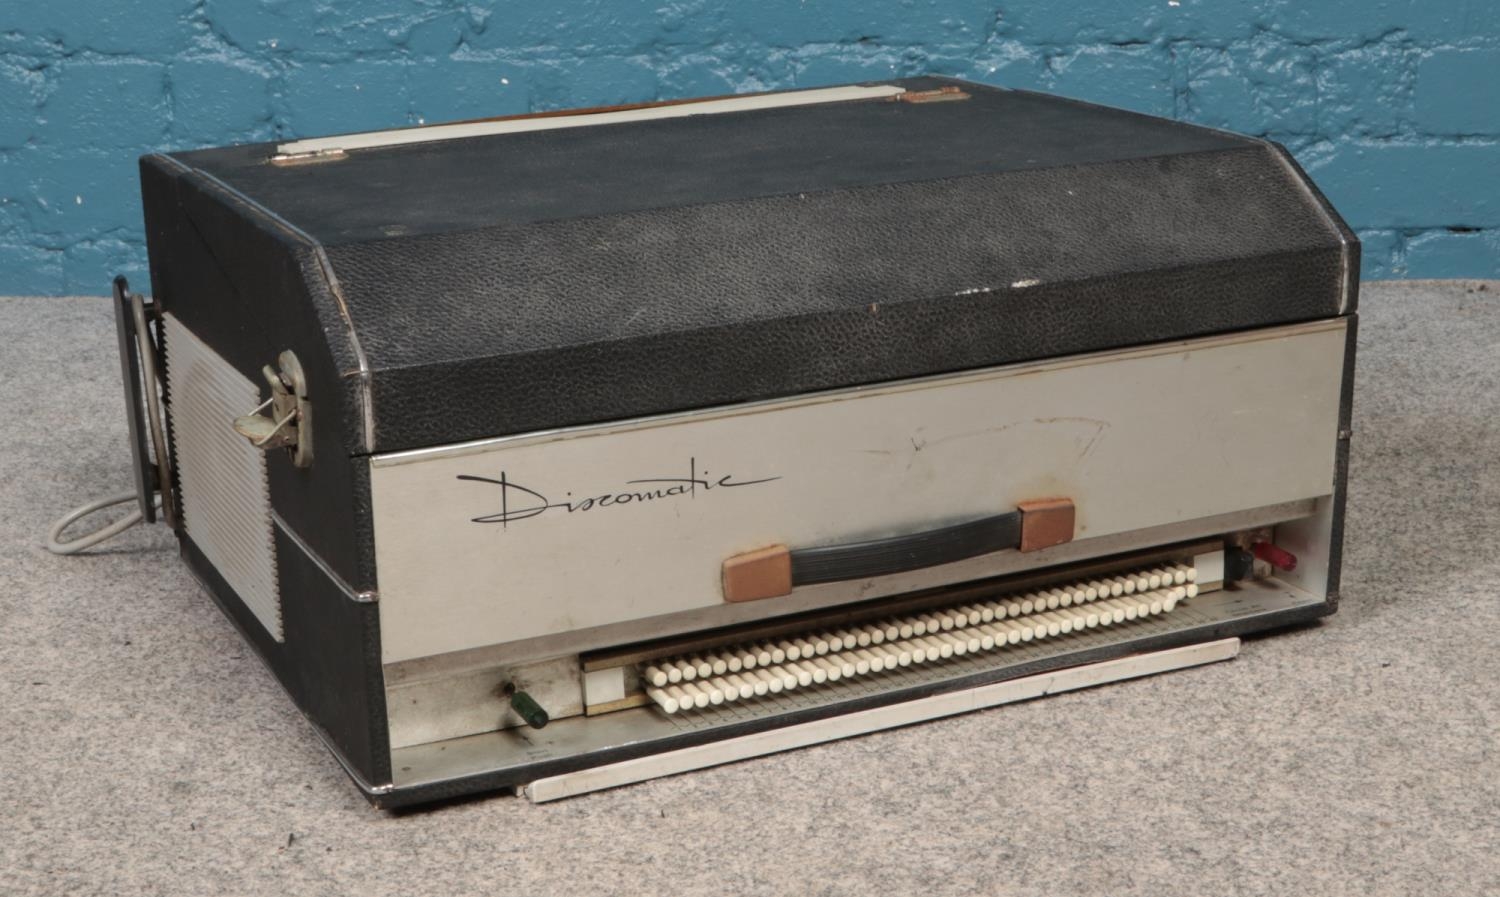 A Discomatic c1960's portable jukebox. Comes with facility to hold forty single vinyl records.